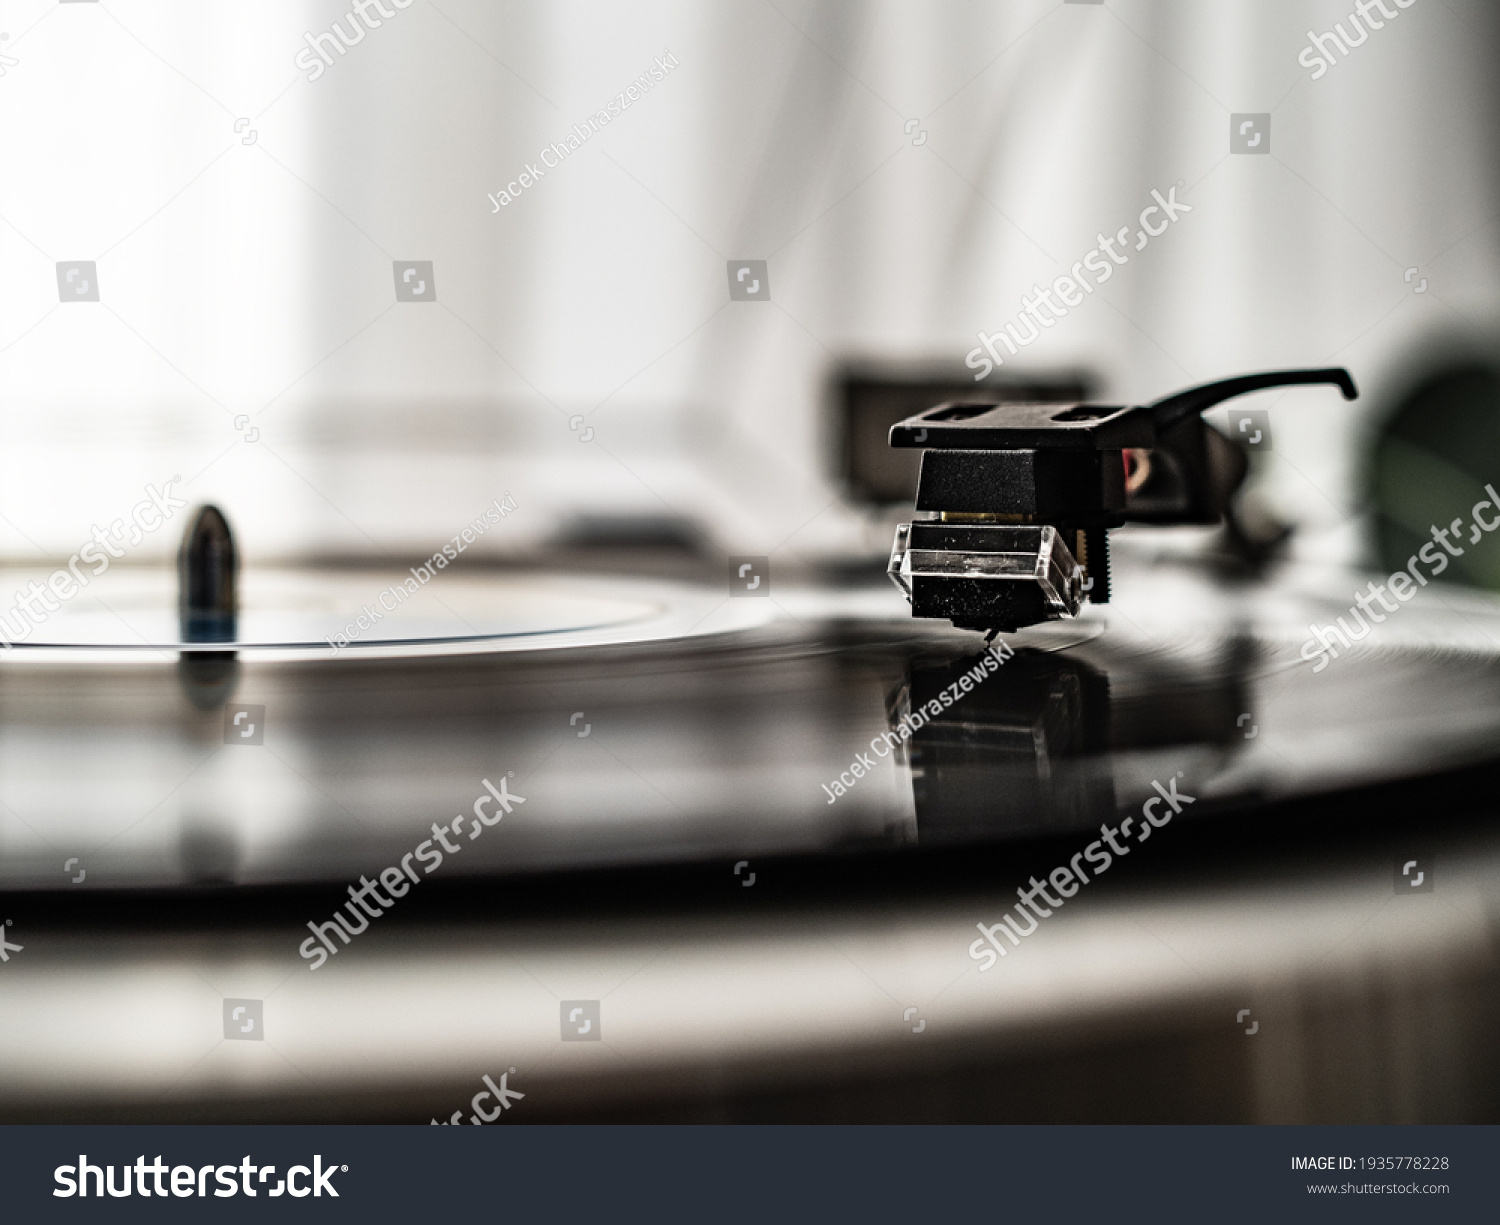 Turntable plays a vinyl record  #1935778228